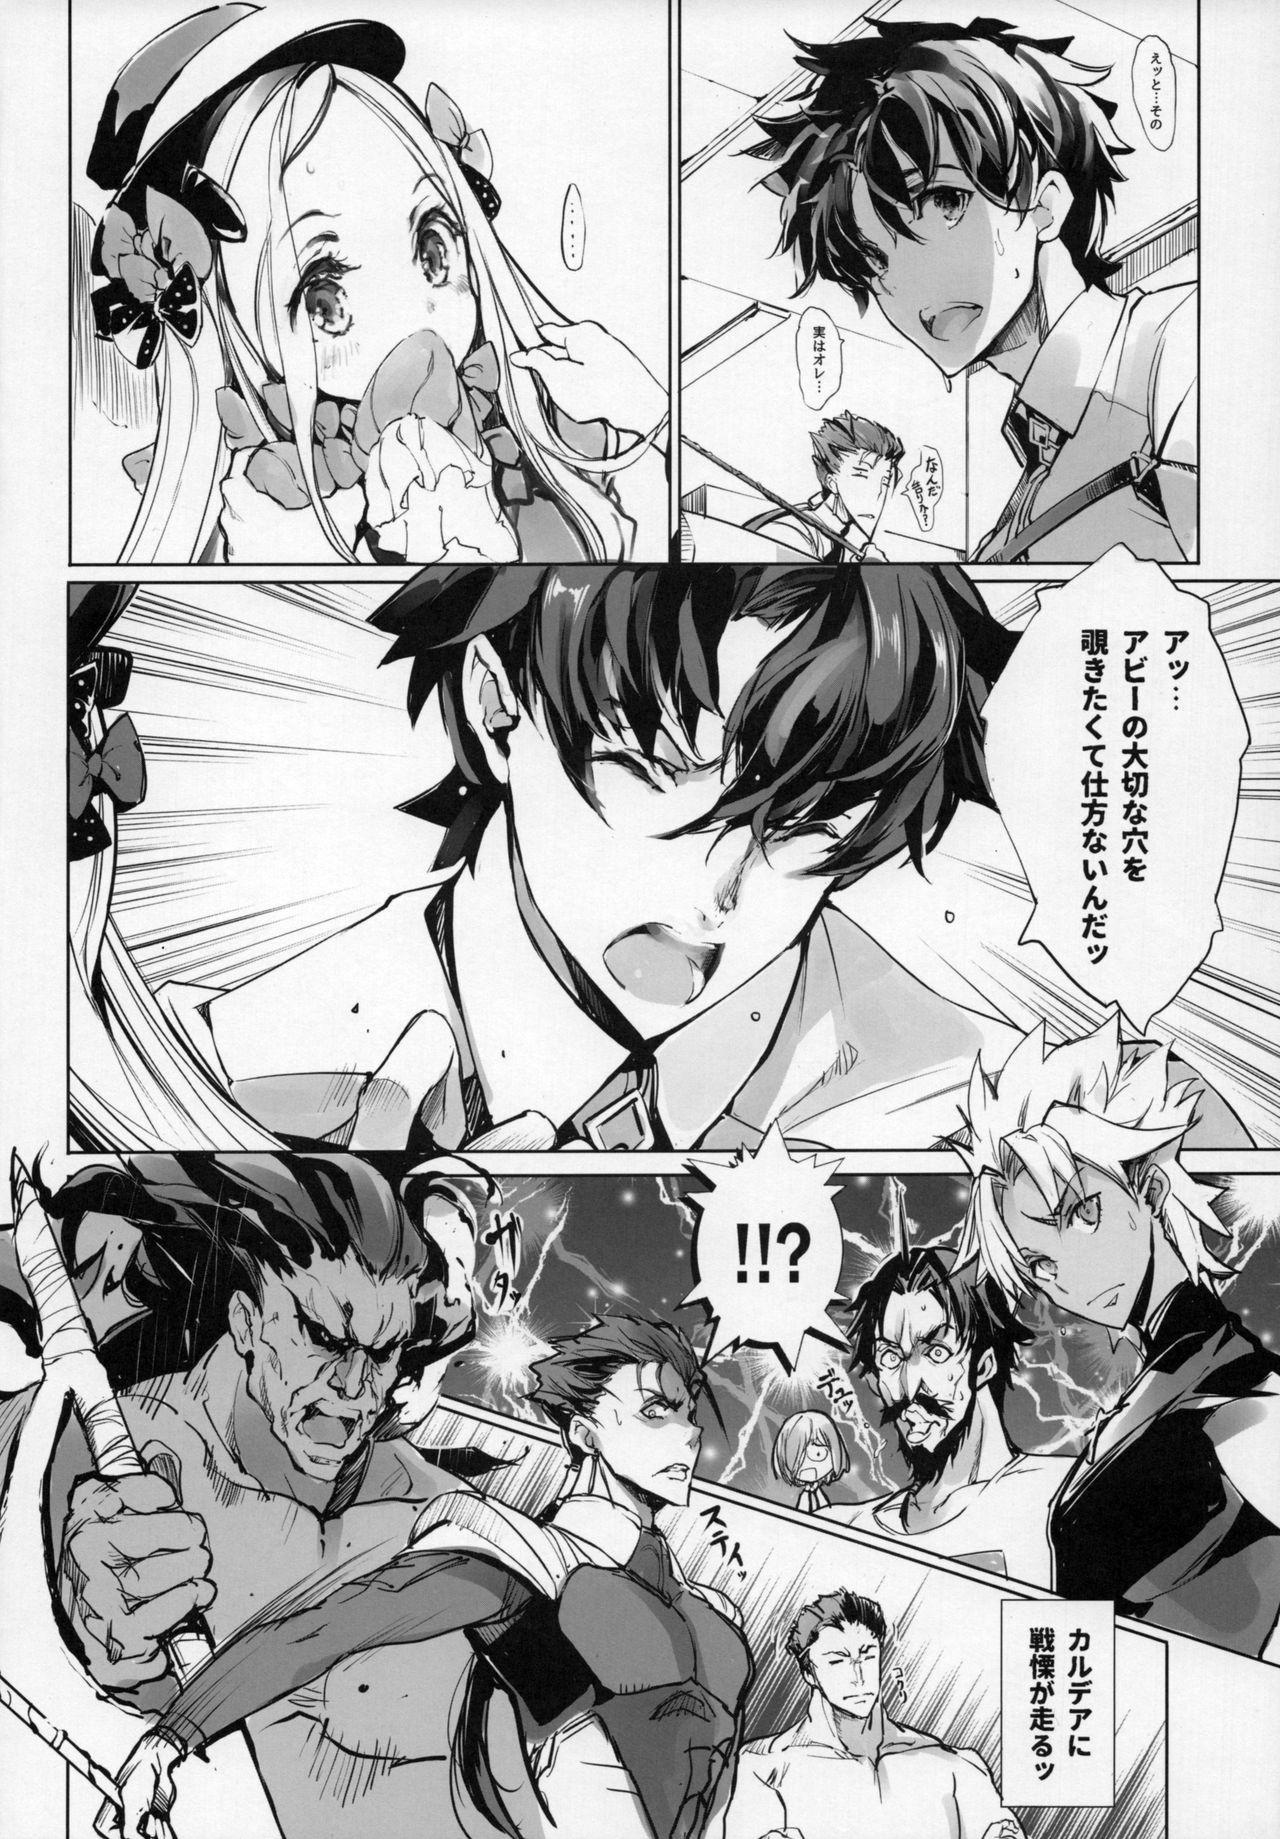 Bathroom Sen no Ko o Haramu Mori no Shoujo - The girl of the woods with a thousand young - Fate grand order Amature Sex Tapes - Page 7